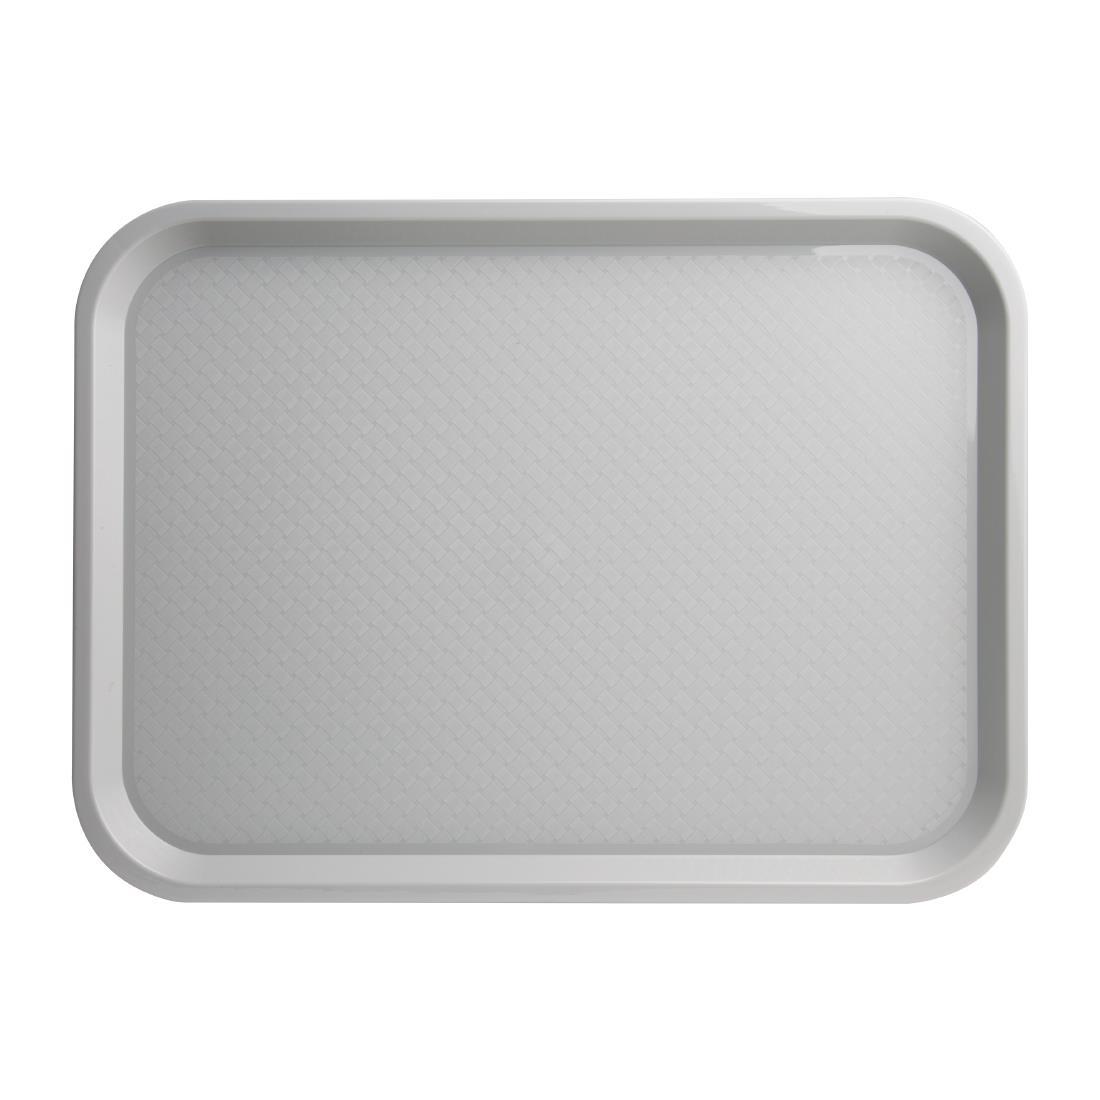 Kristallon Foodservice Tray Size 305 X 415mm for sale online 